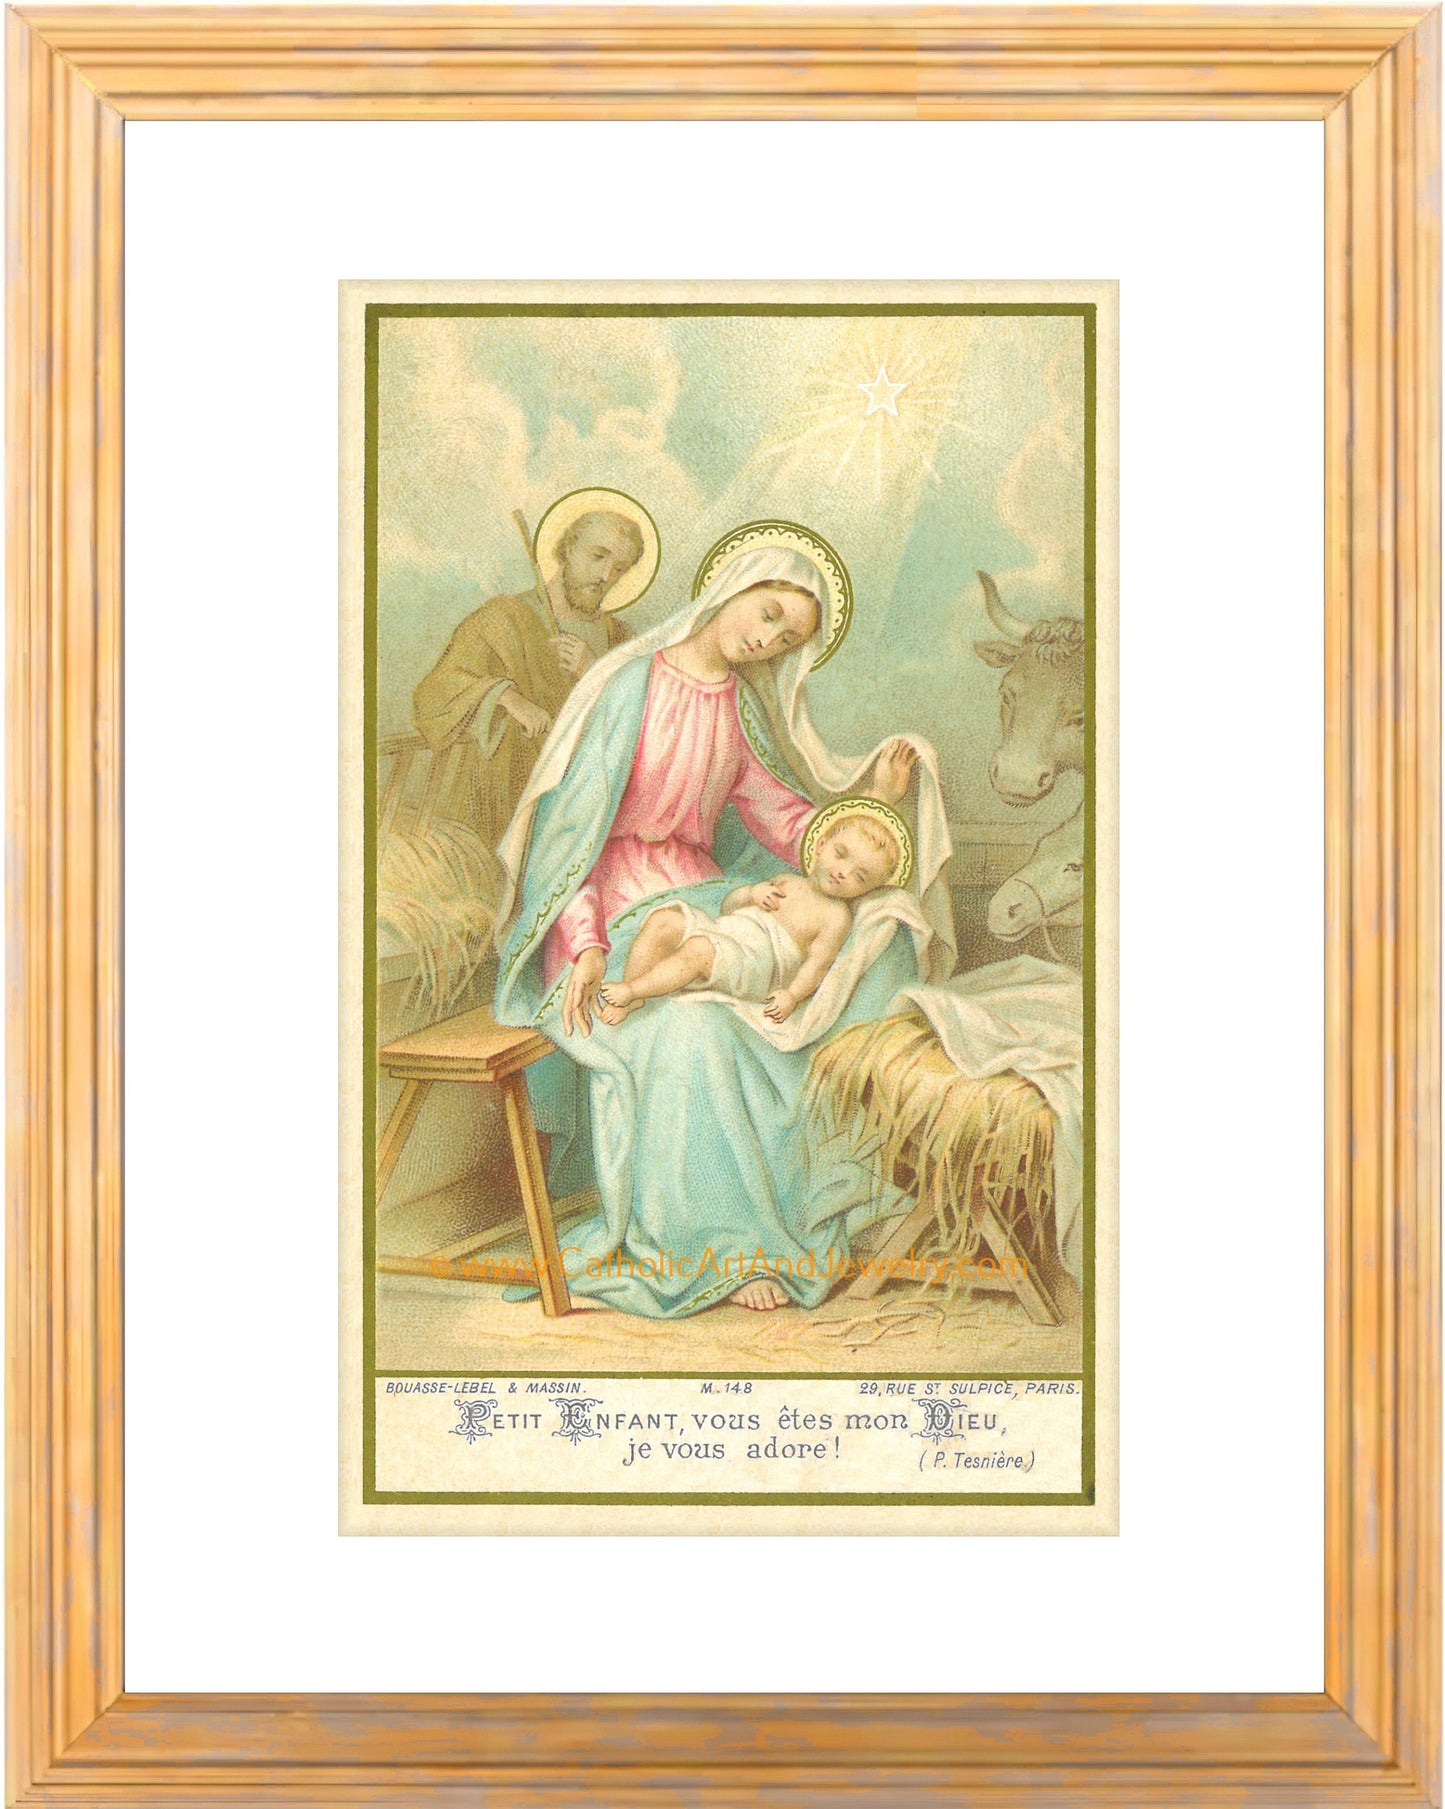 Christmas Nativity – based on a Vintage French Holy Card – Catholic Art Print – Victorian – Archival Quality